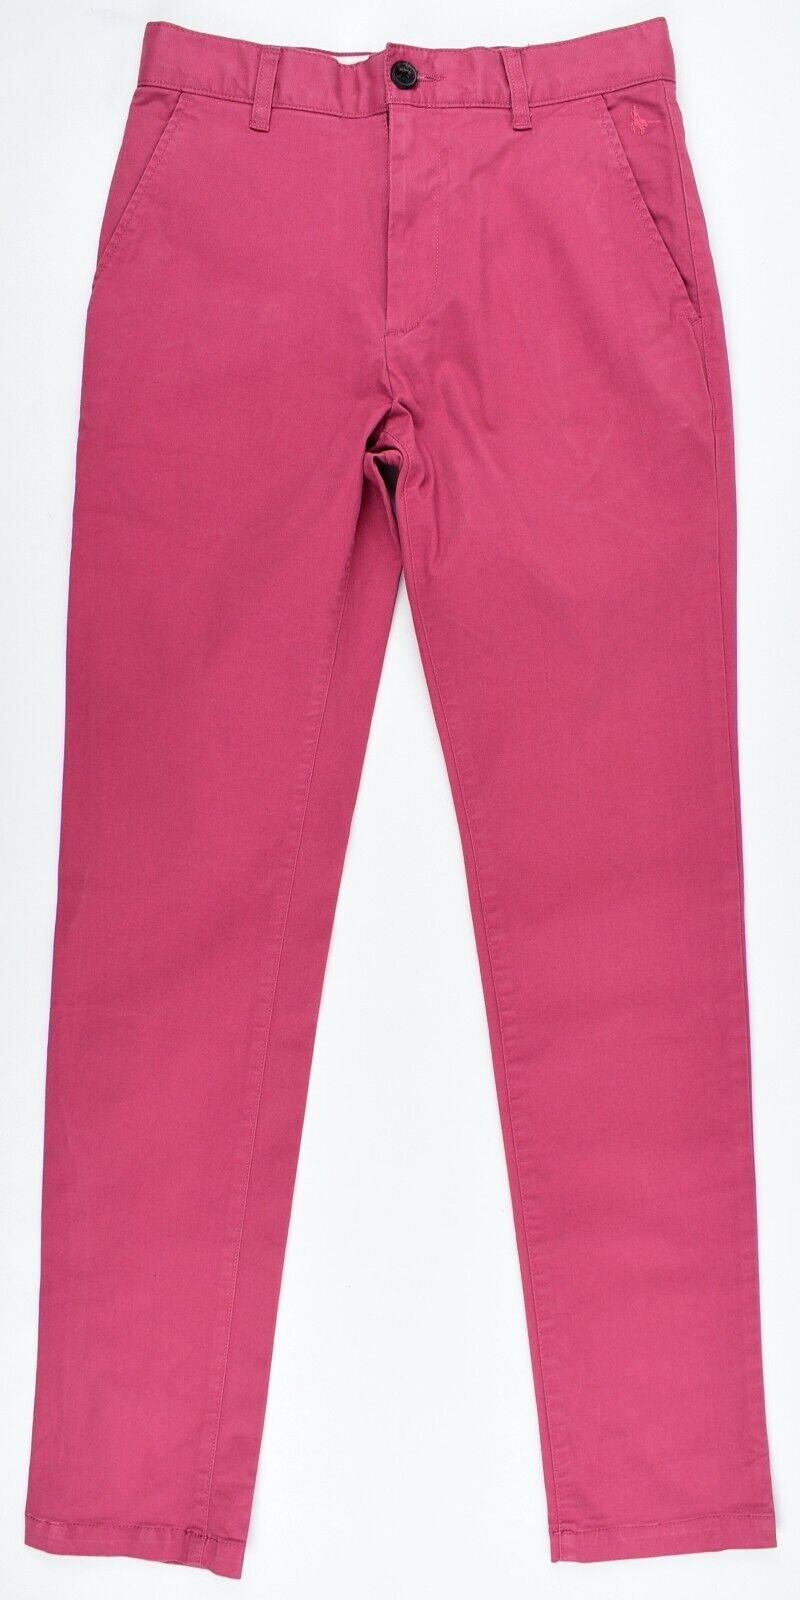 JACK WILLS Men's SLIM-SKINNY FIT Chino Trousers Pants, Damson Red, size W28 R